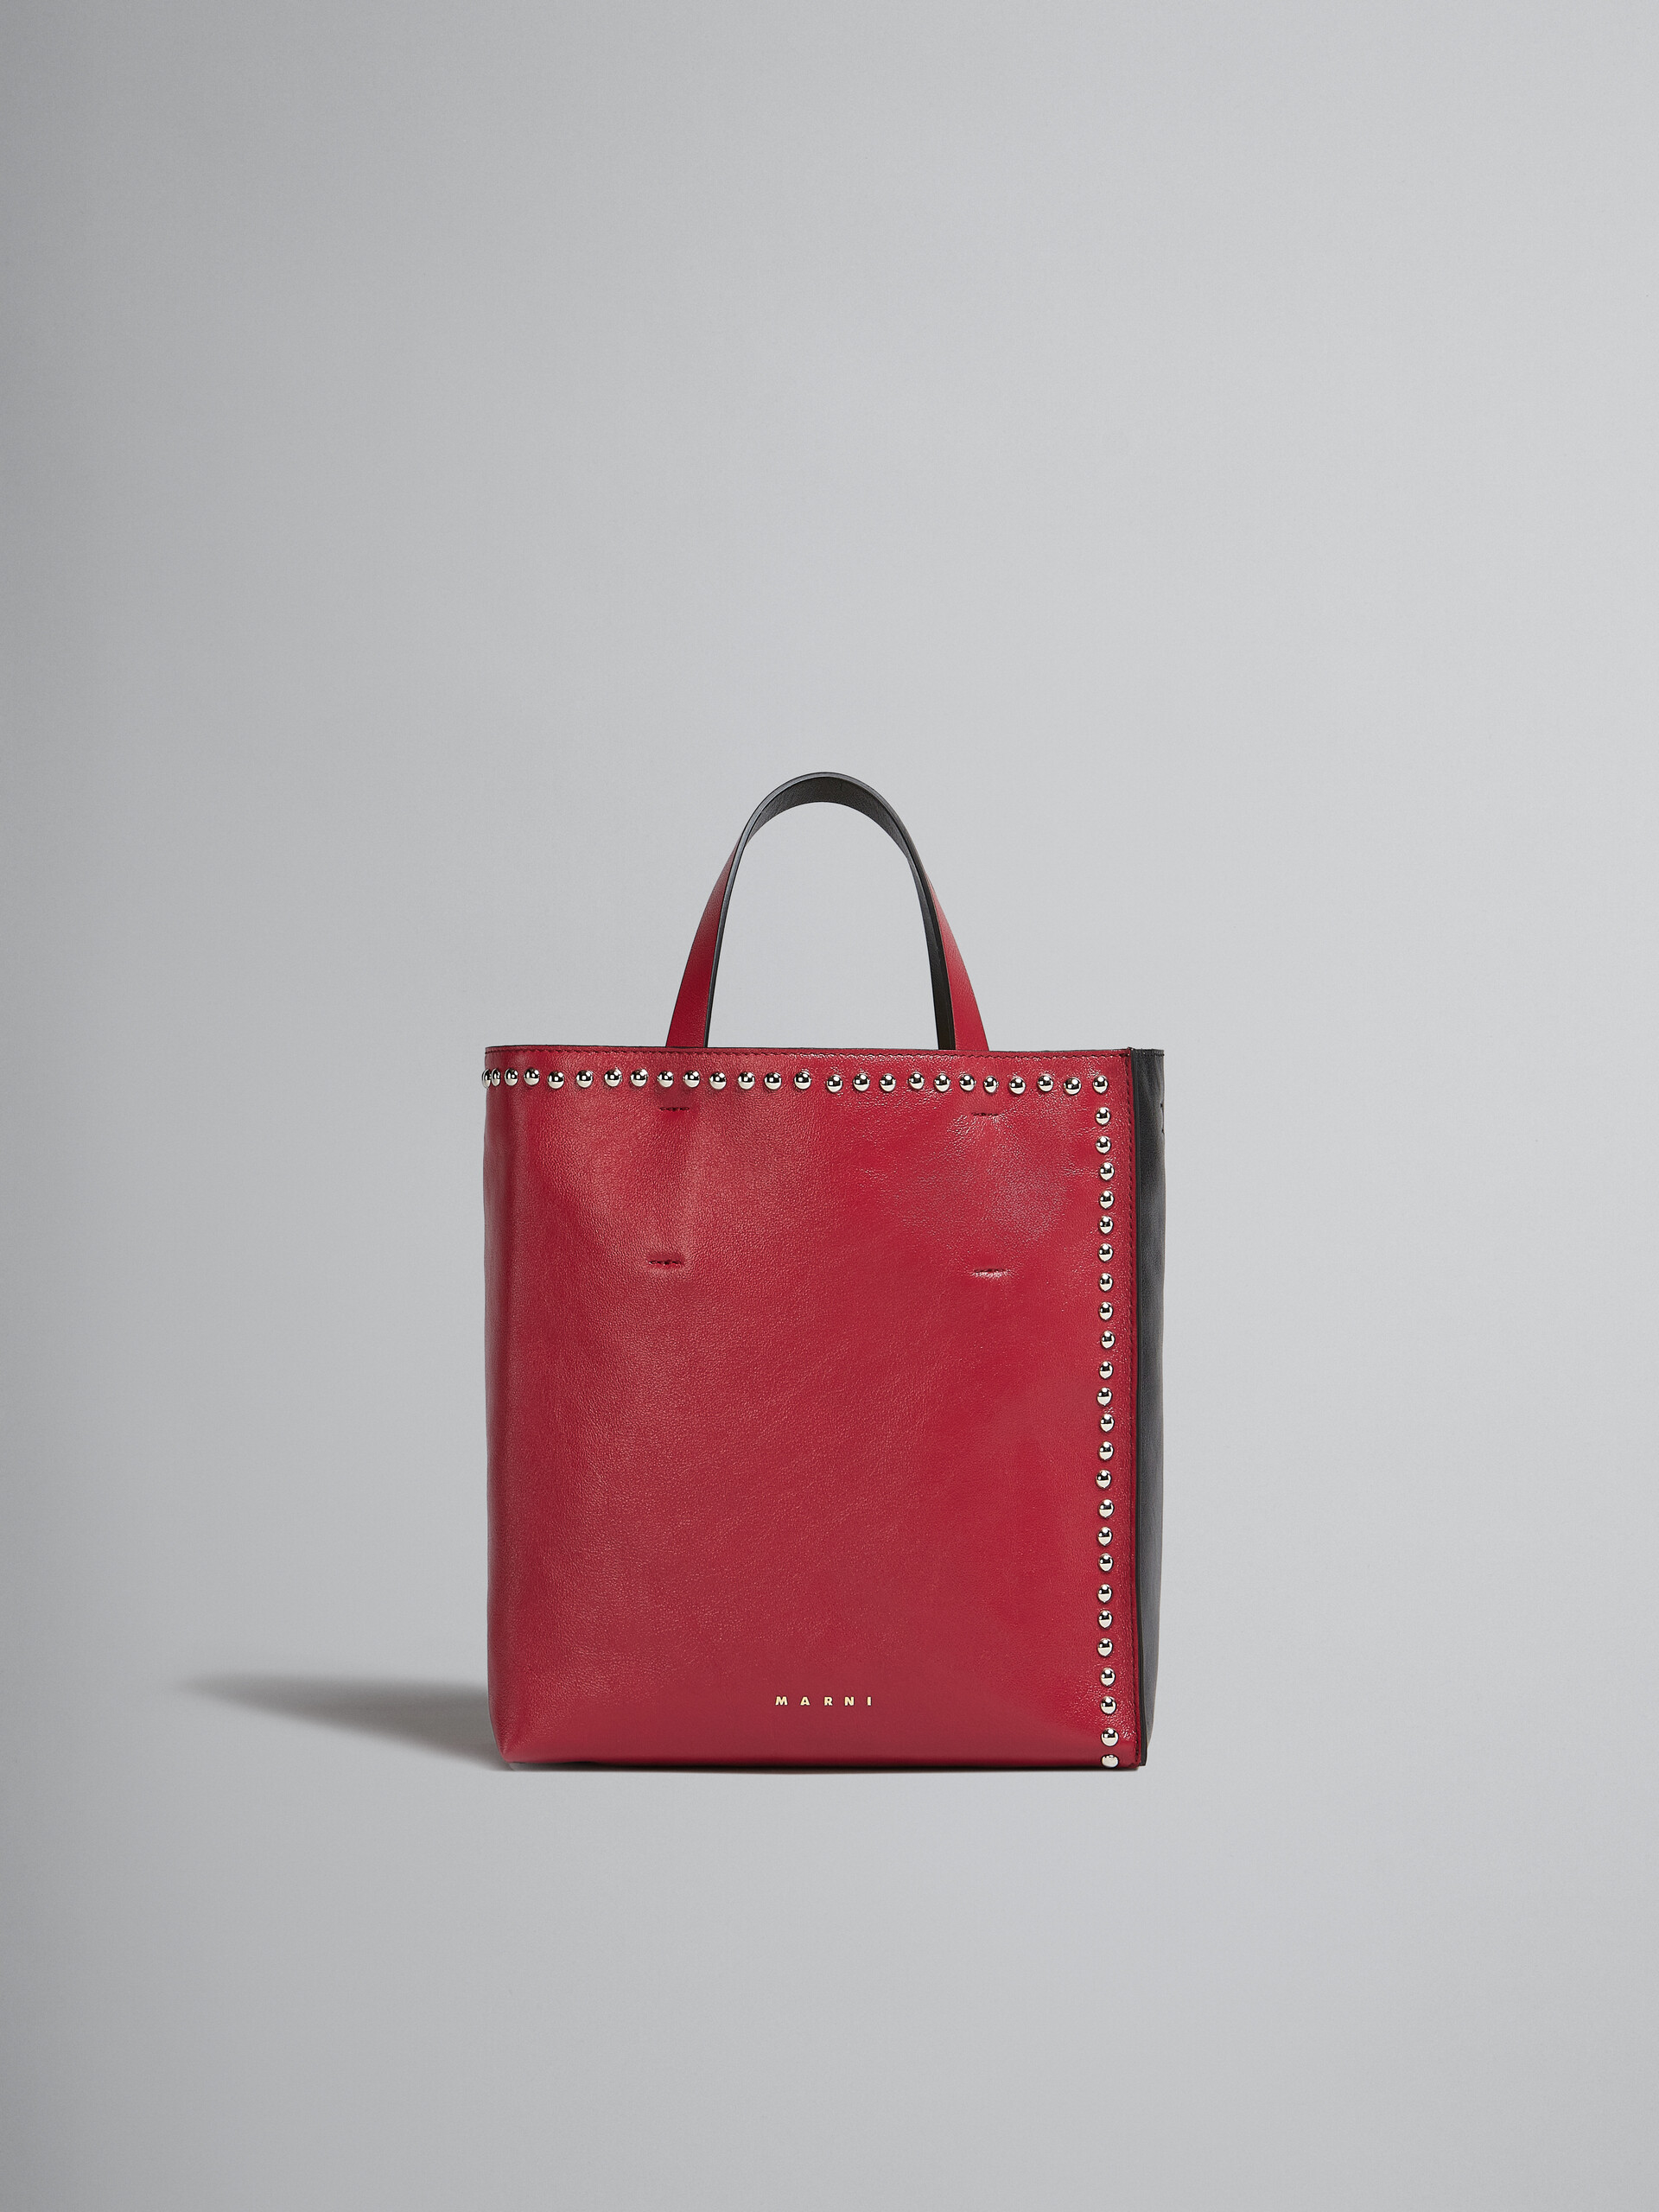 Museo Soft Small Bag in red and black leather with studs - Shopping Bags - Image 1